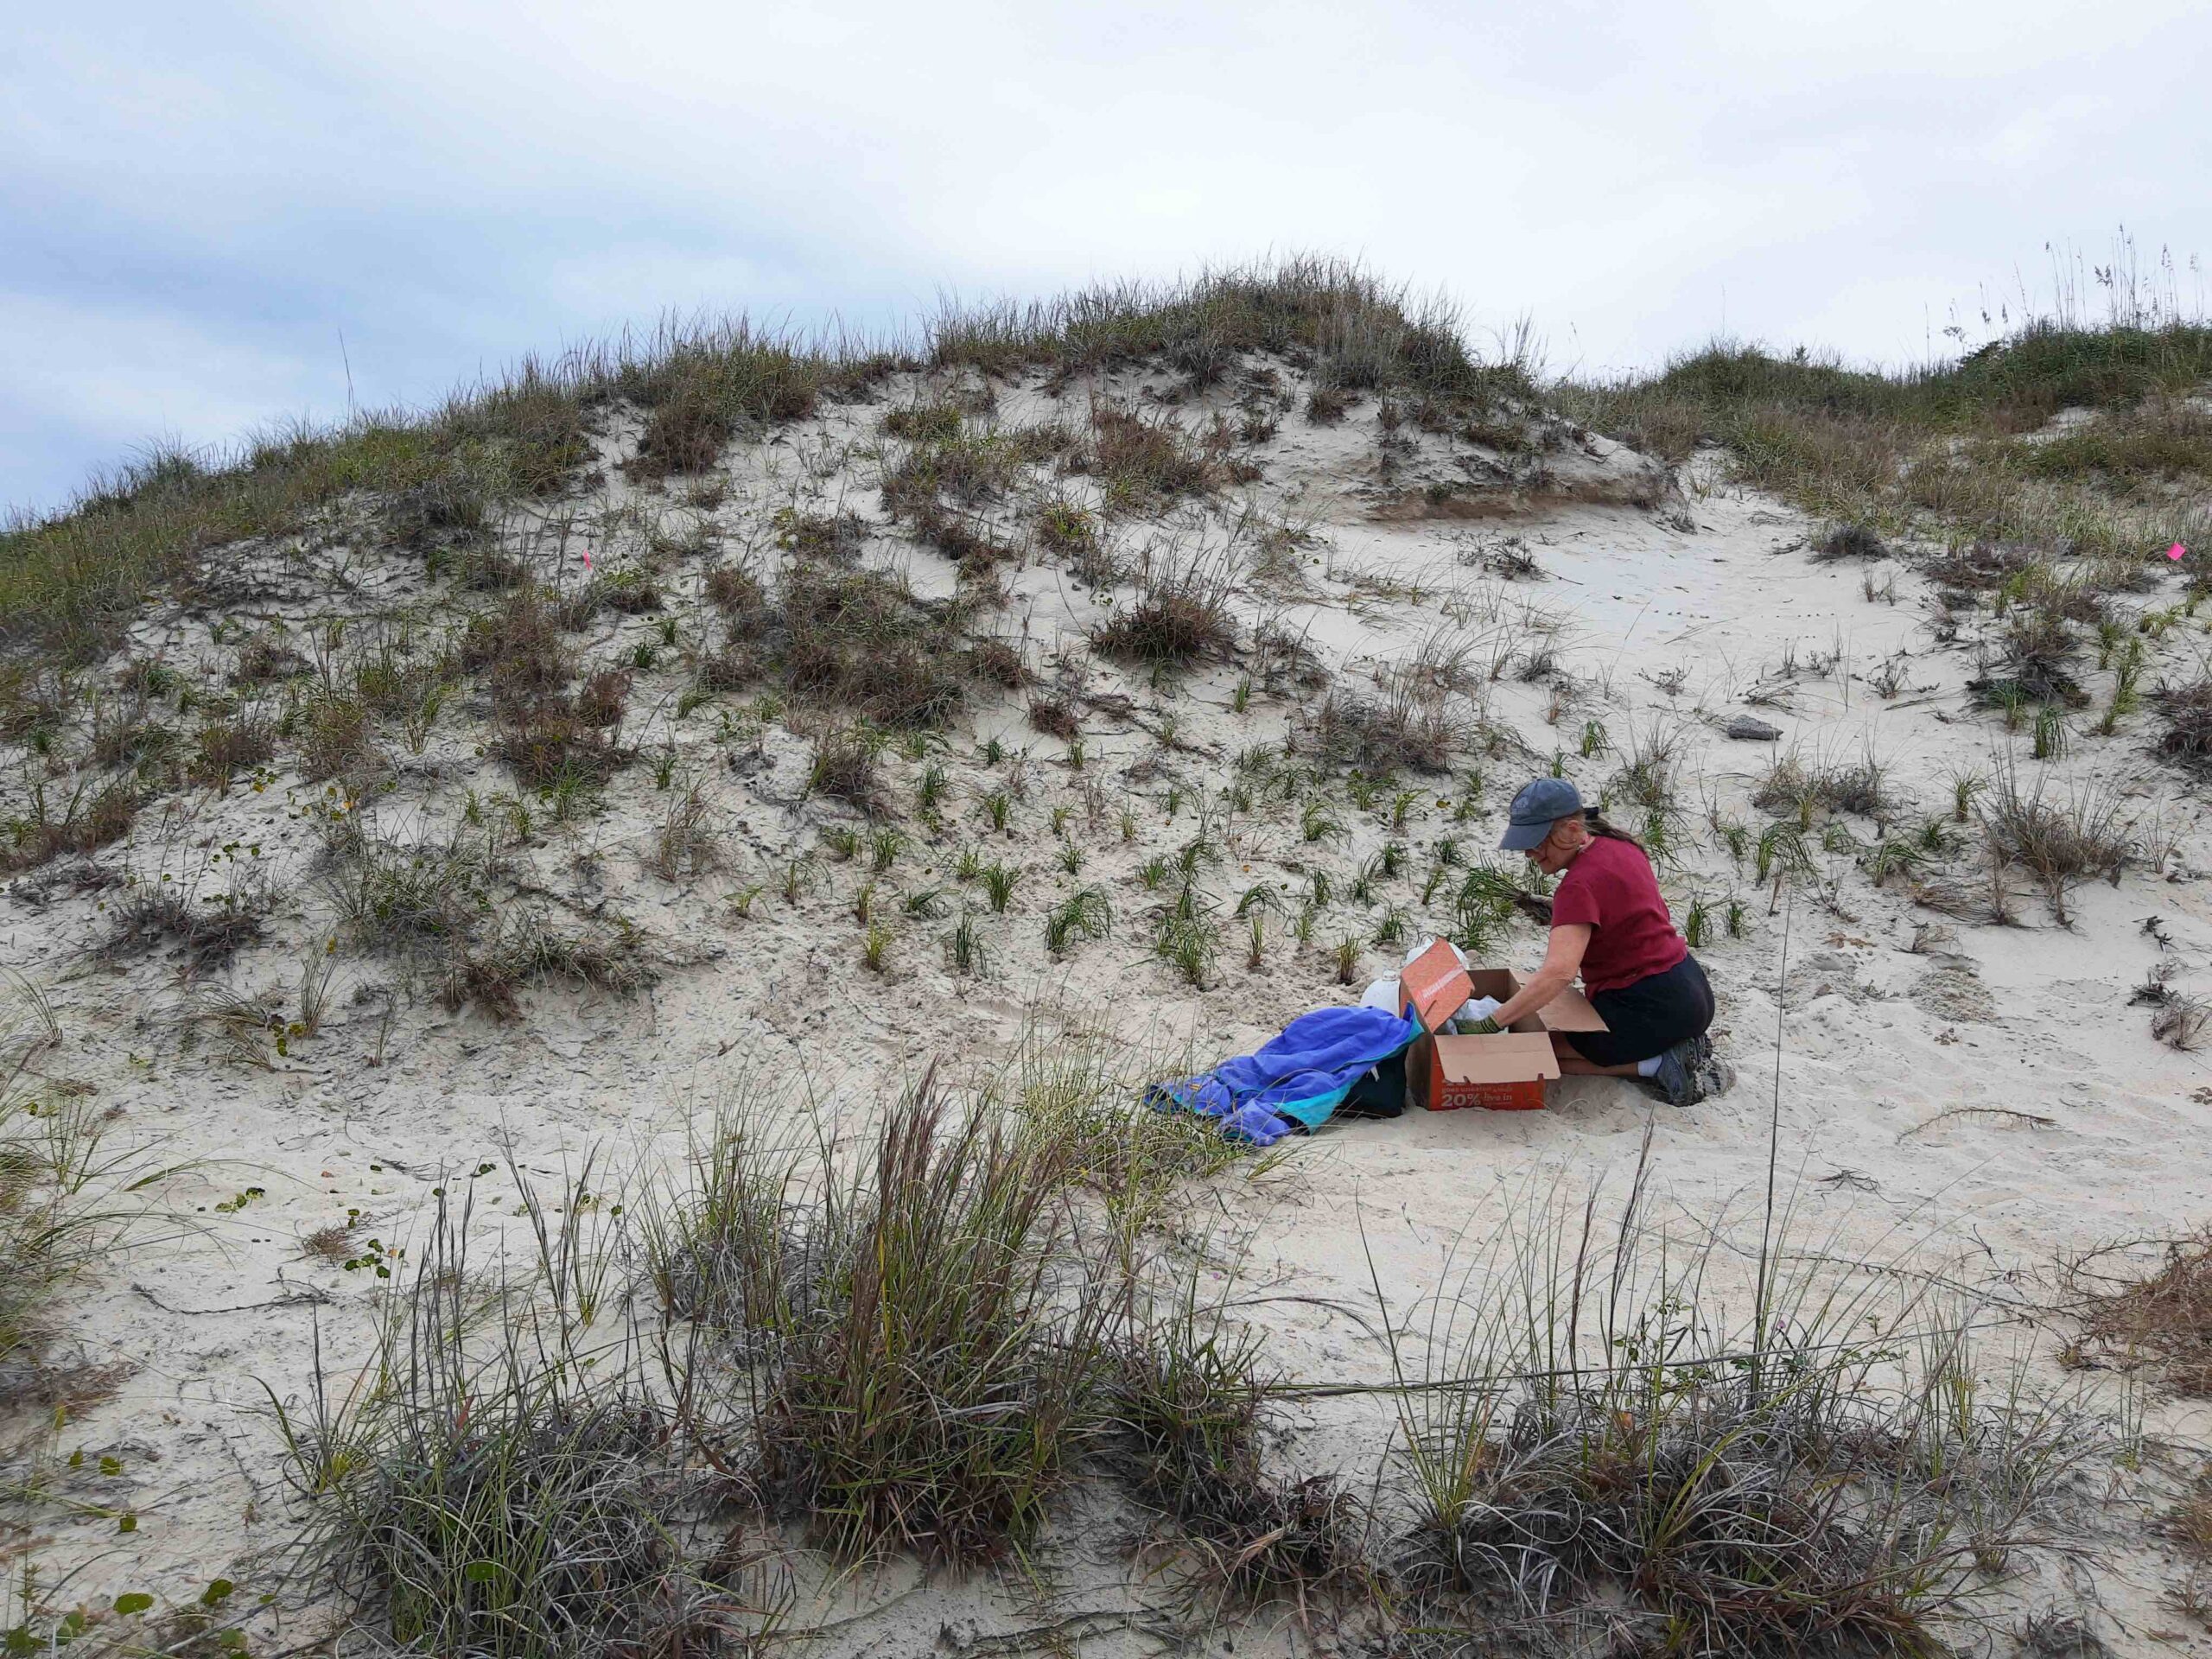 Volunteer Georgia Minnich, who recently retired from the N.C. Aquarium at Pine Knoll Shores, plants seaside little bluestem in the Williams dune.